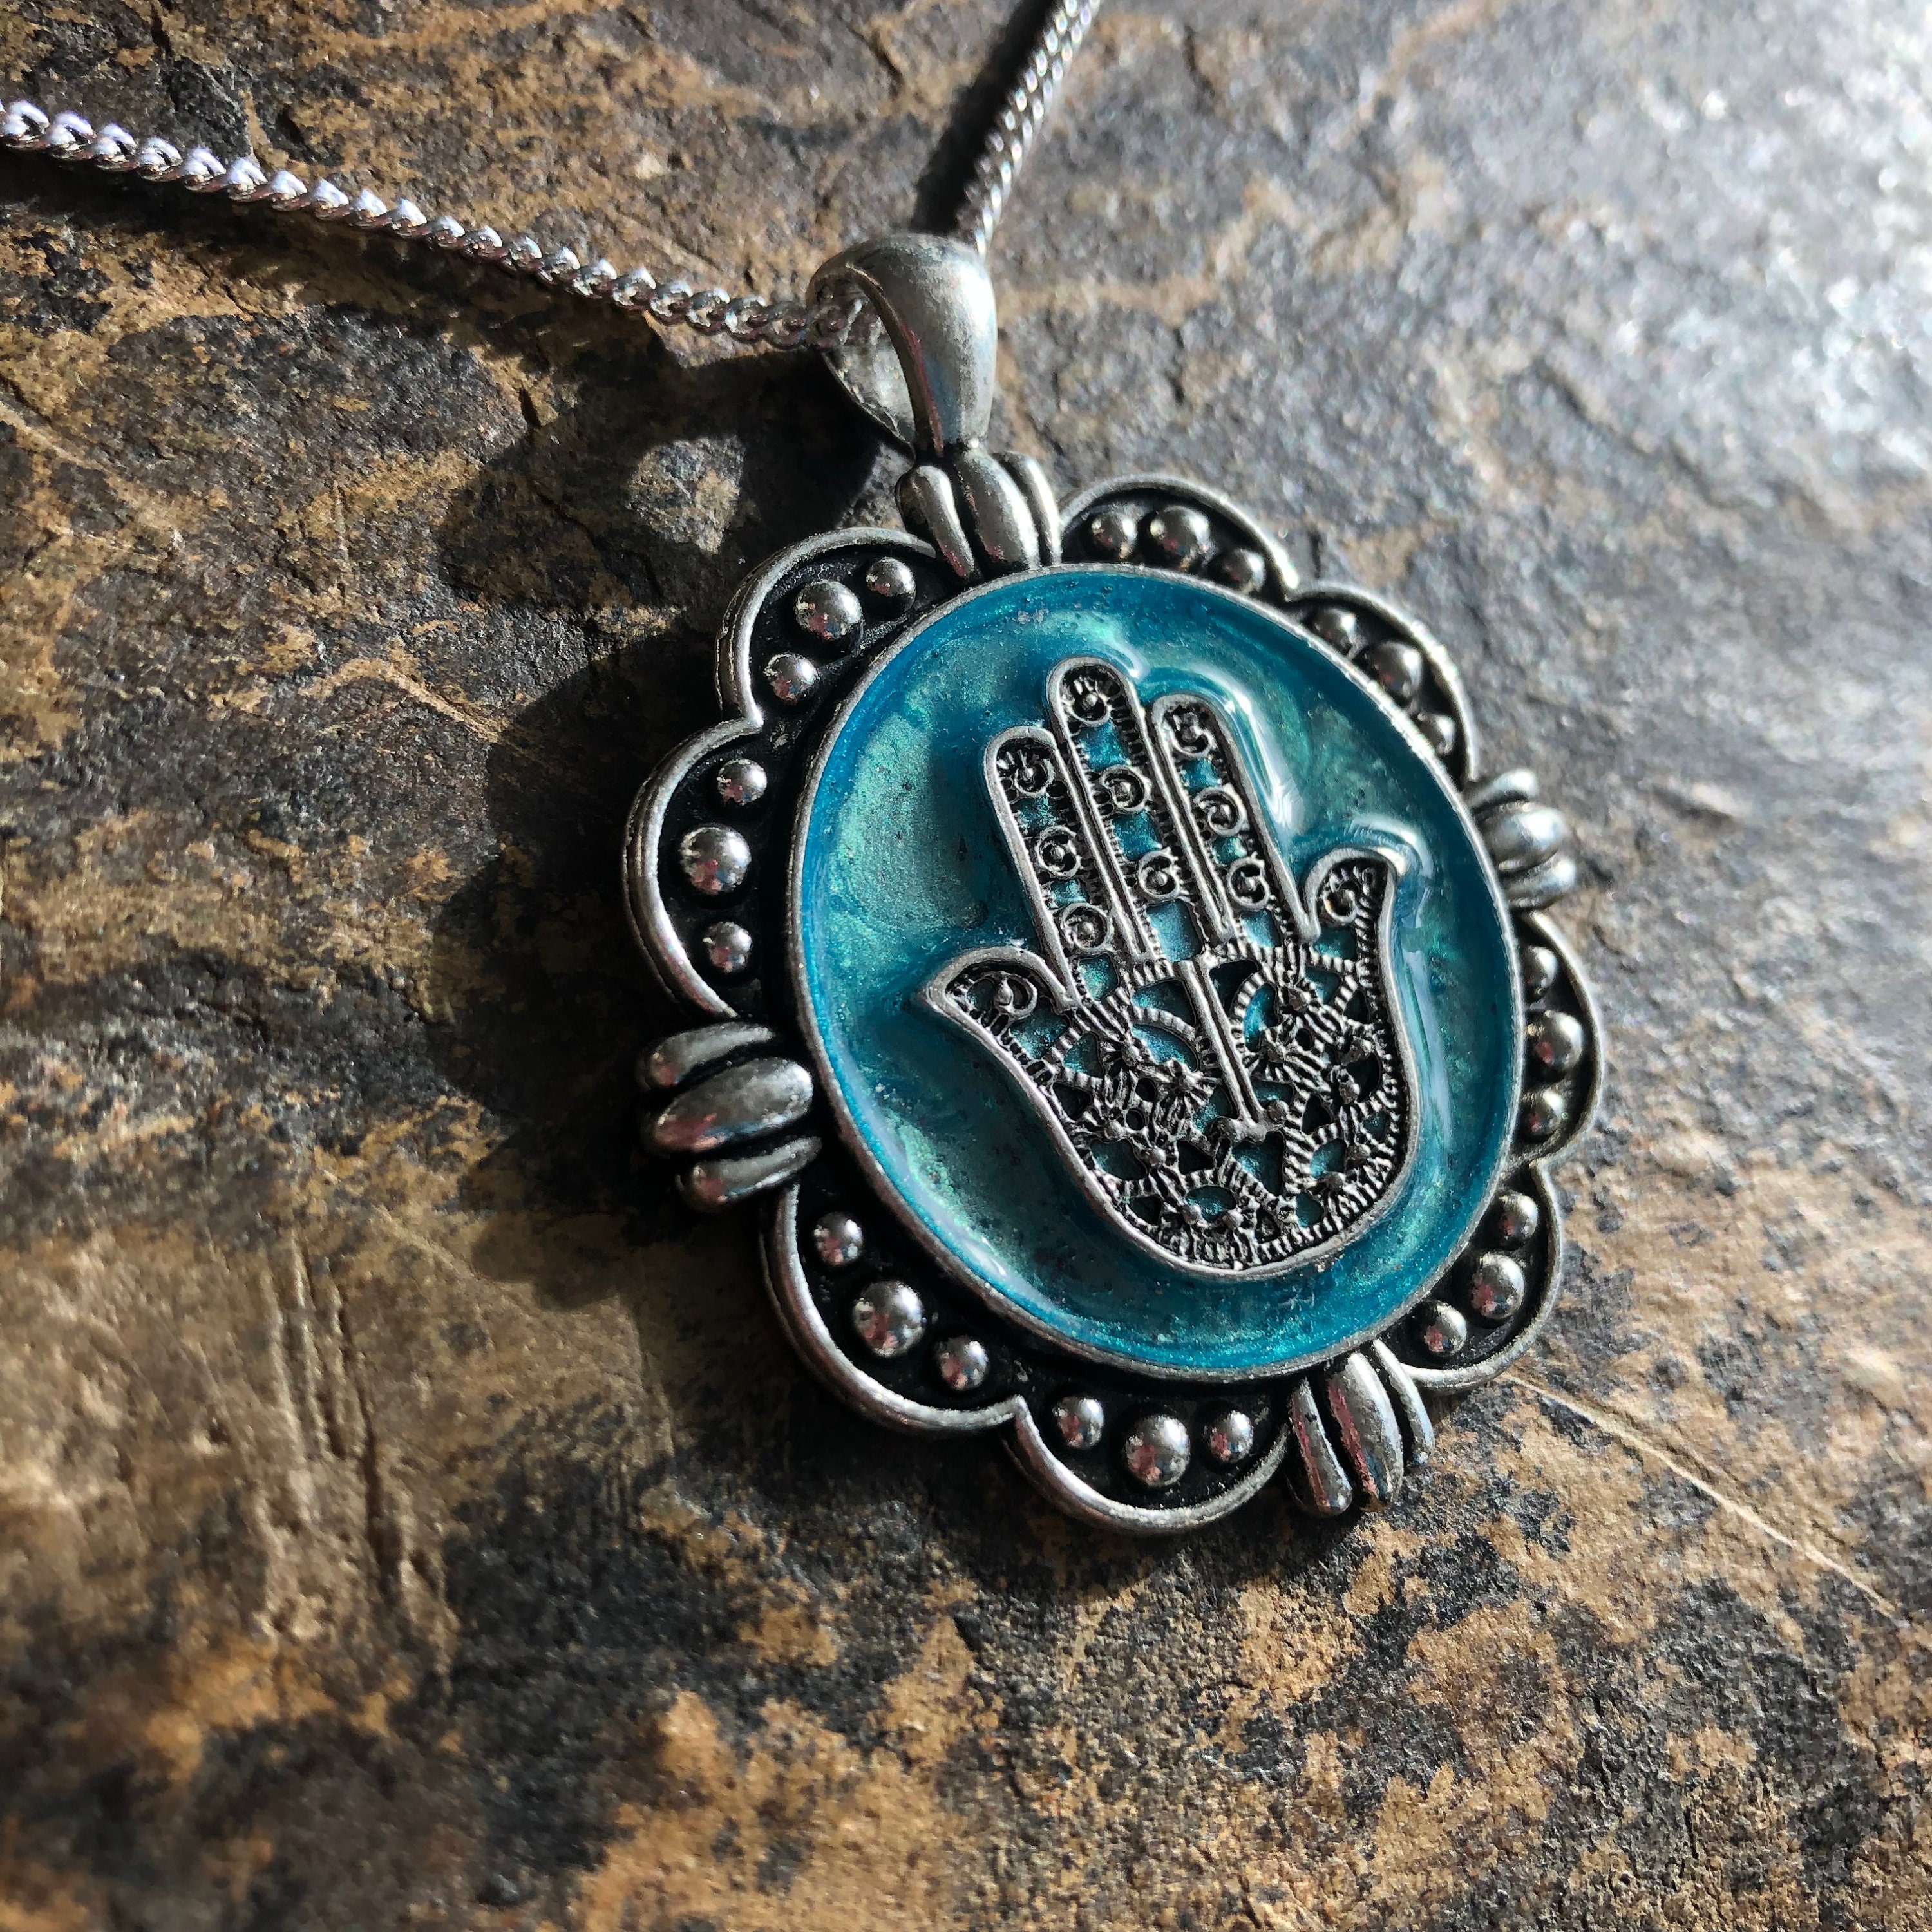 Colorful Hamsa Hand Framed in Blue Pendant on .925 Sterling Silver